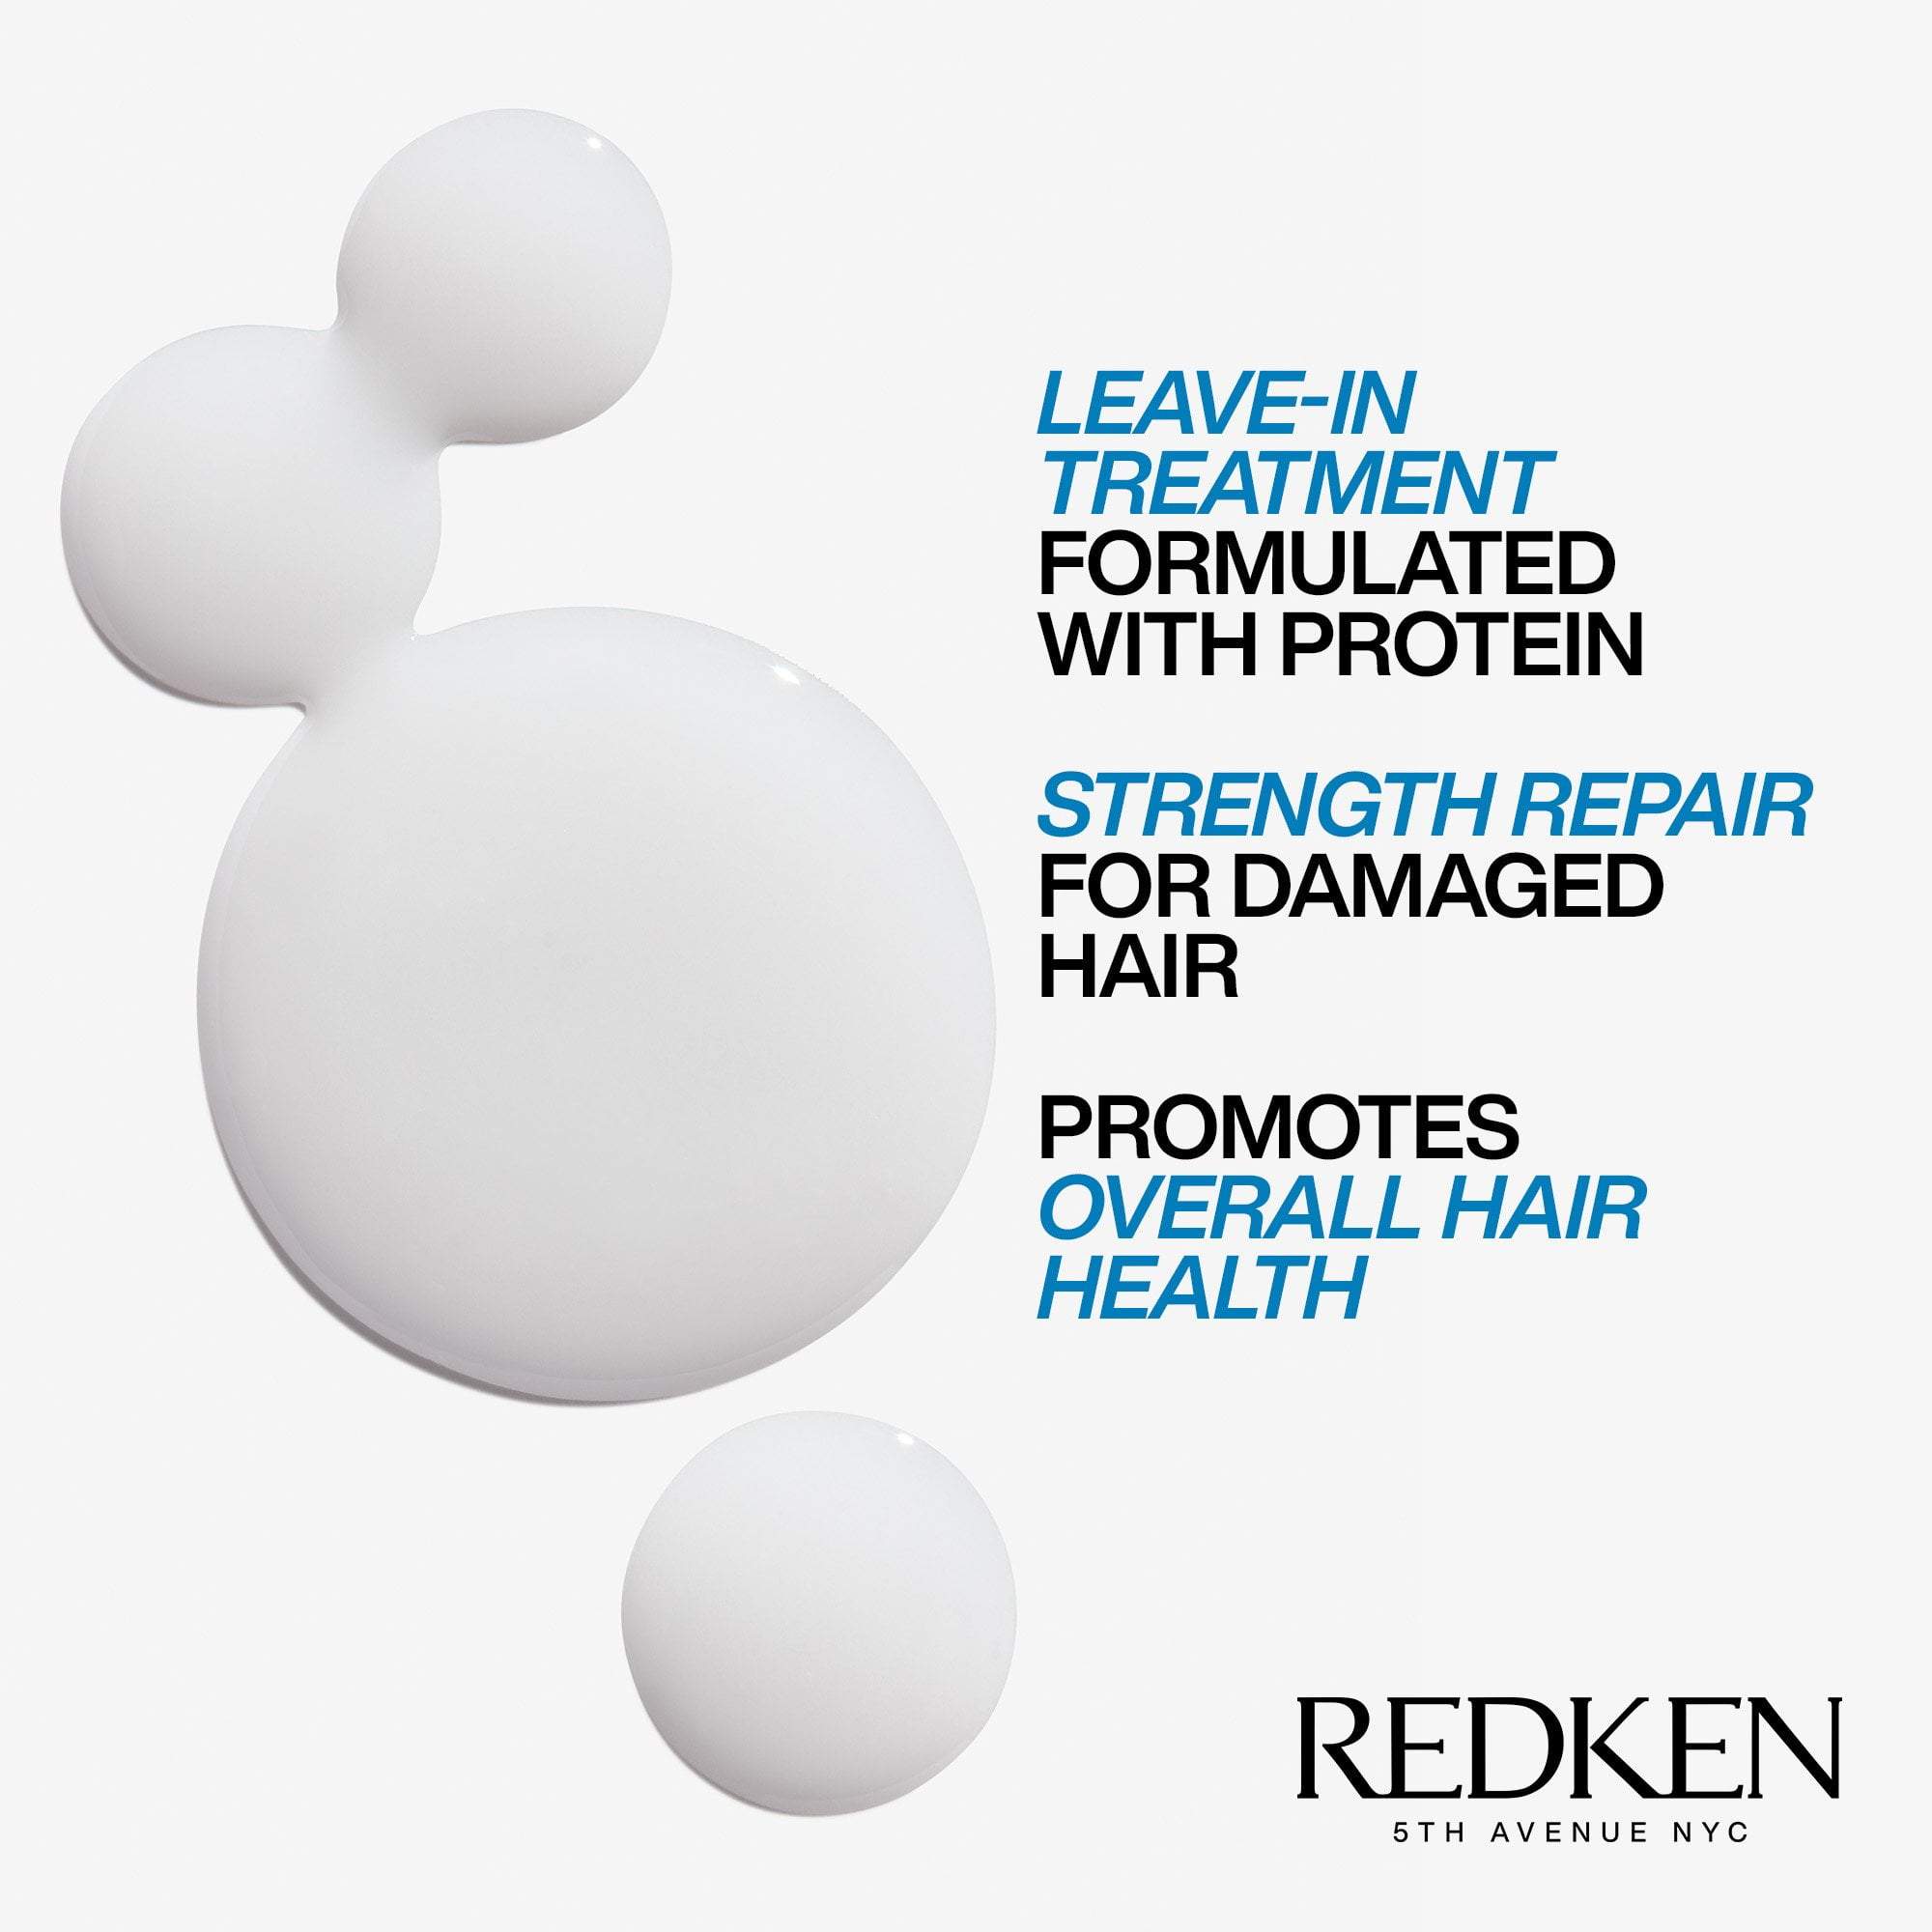 Redken Extreme Anti-snap Leave-In Treatment 240ml